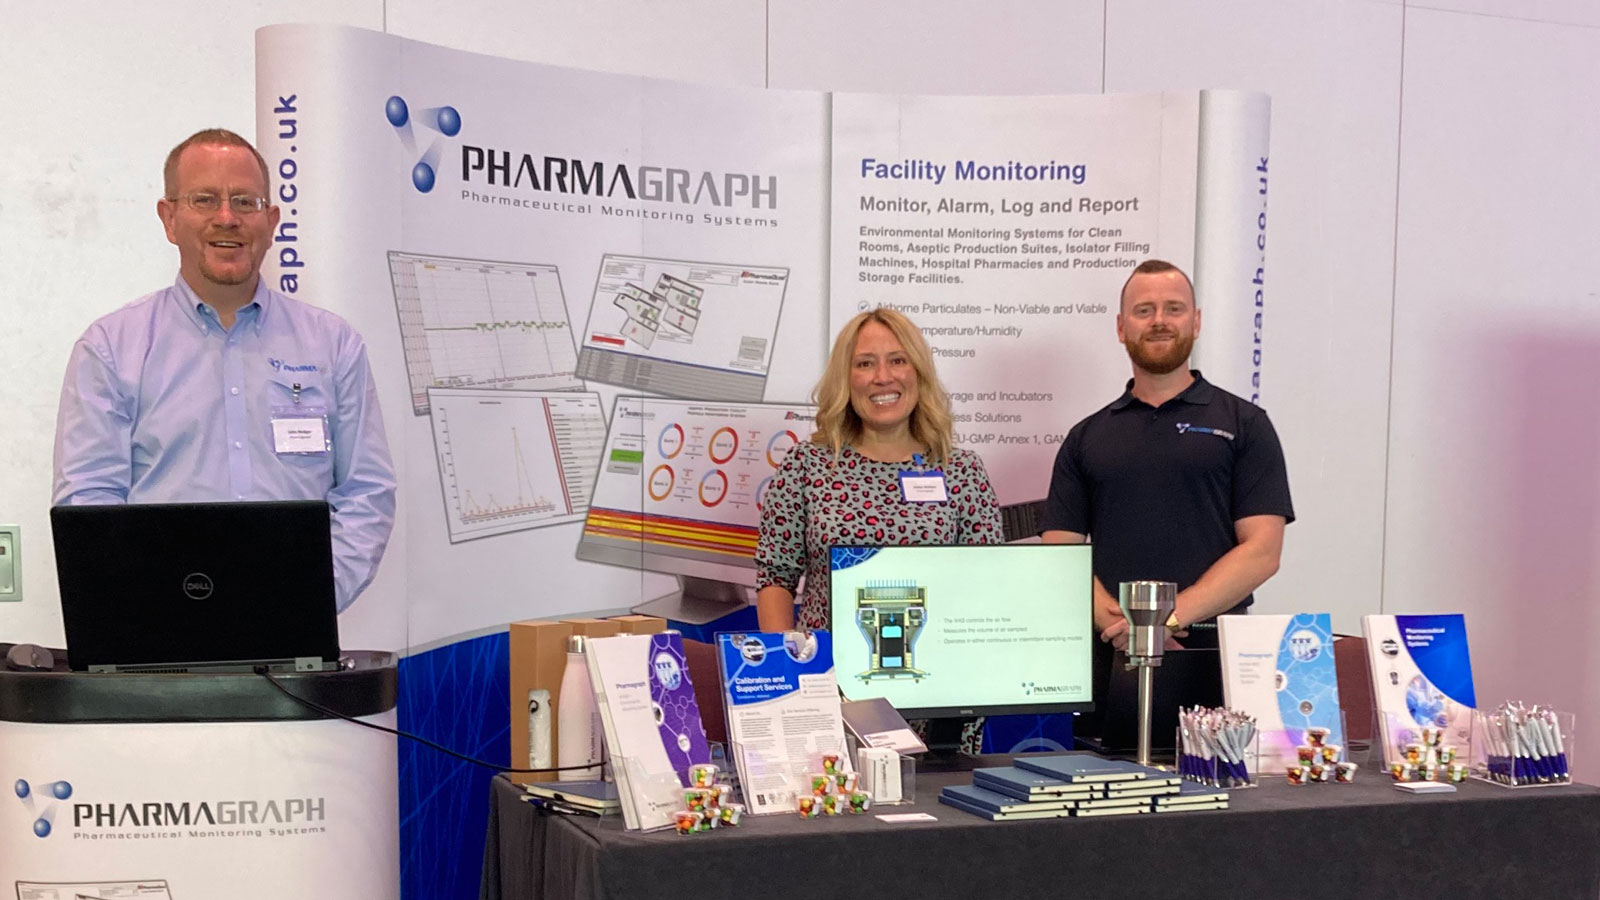 Pharmagraph team and stand display